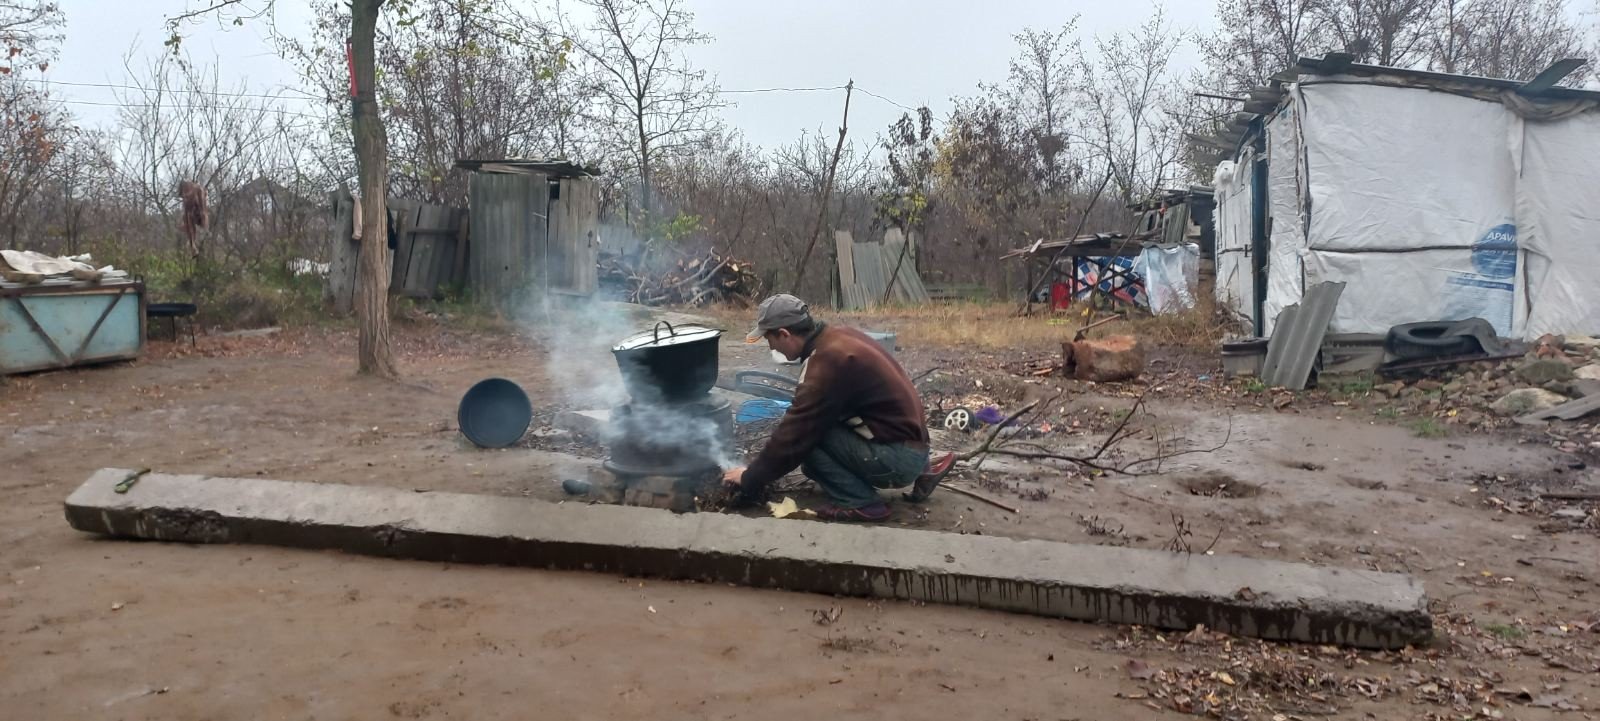 Many families in Moldova cook outside